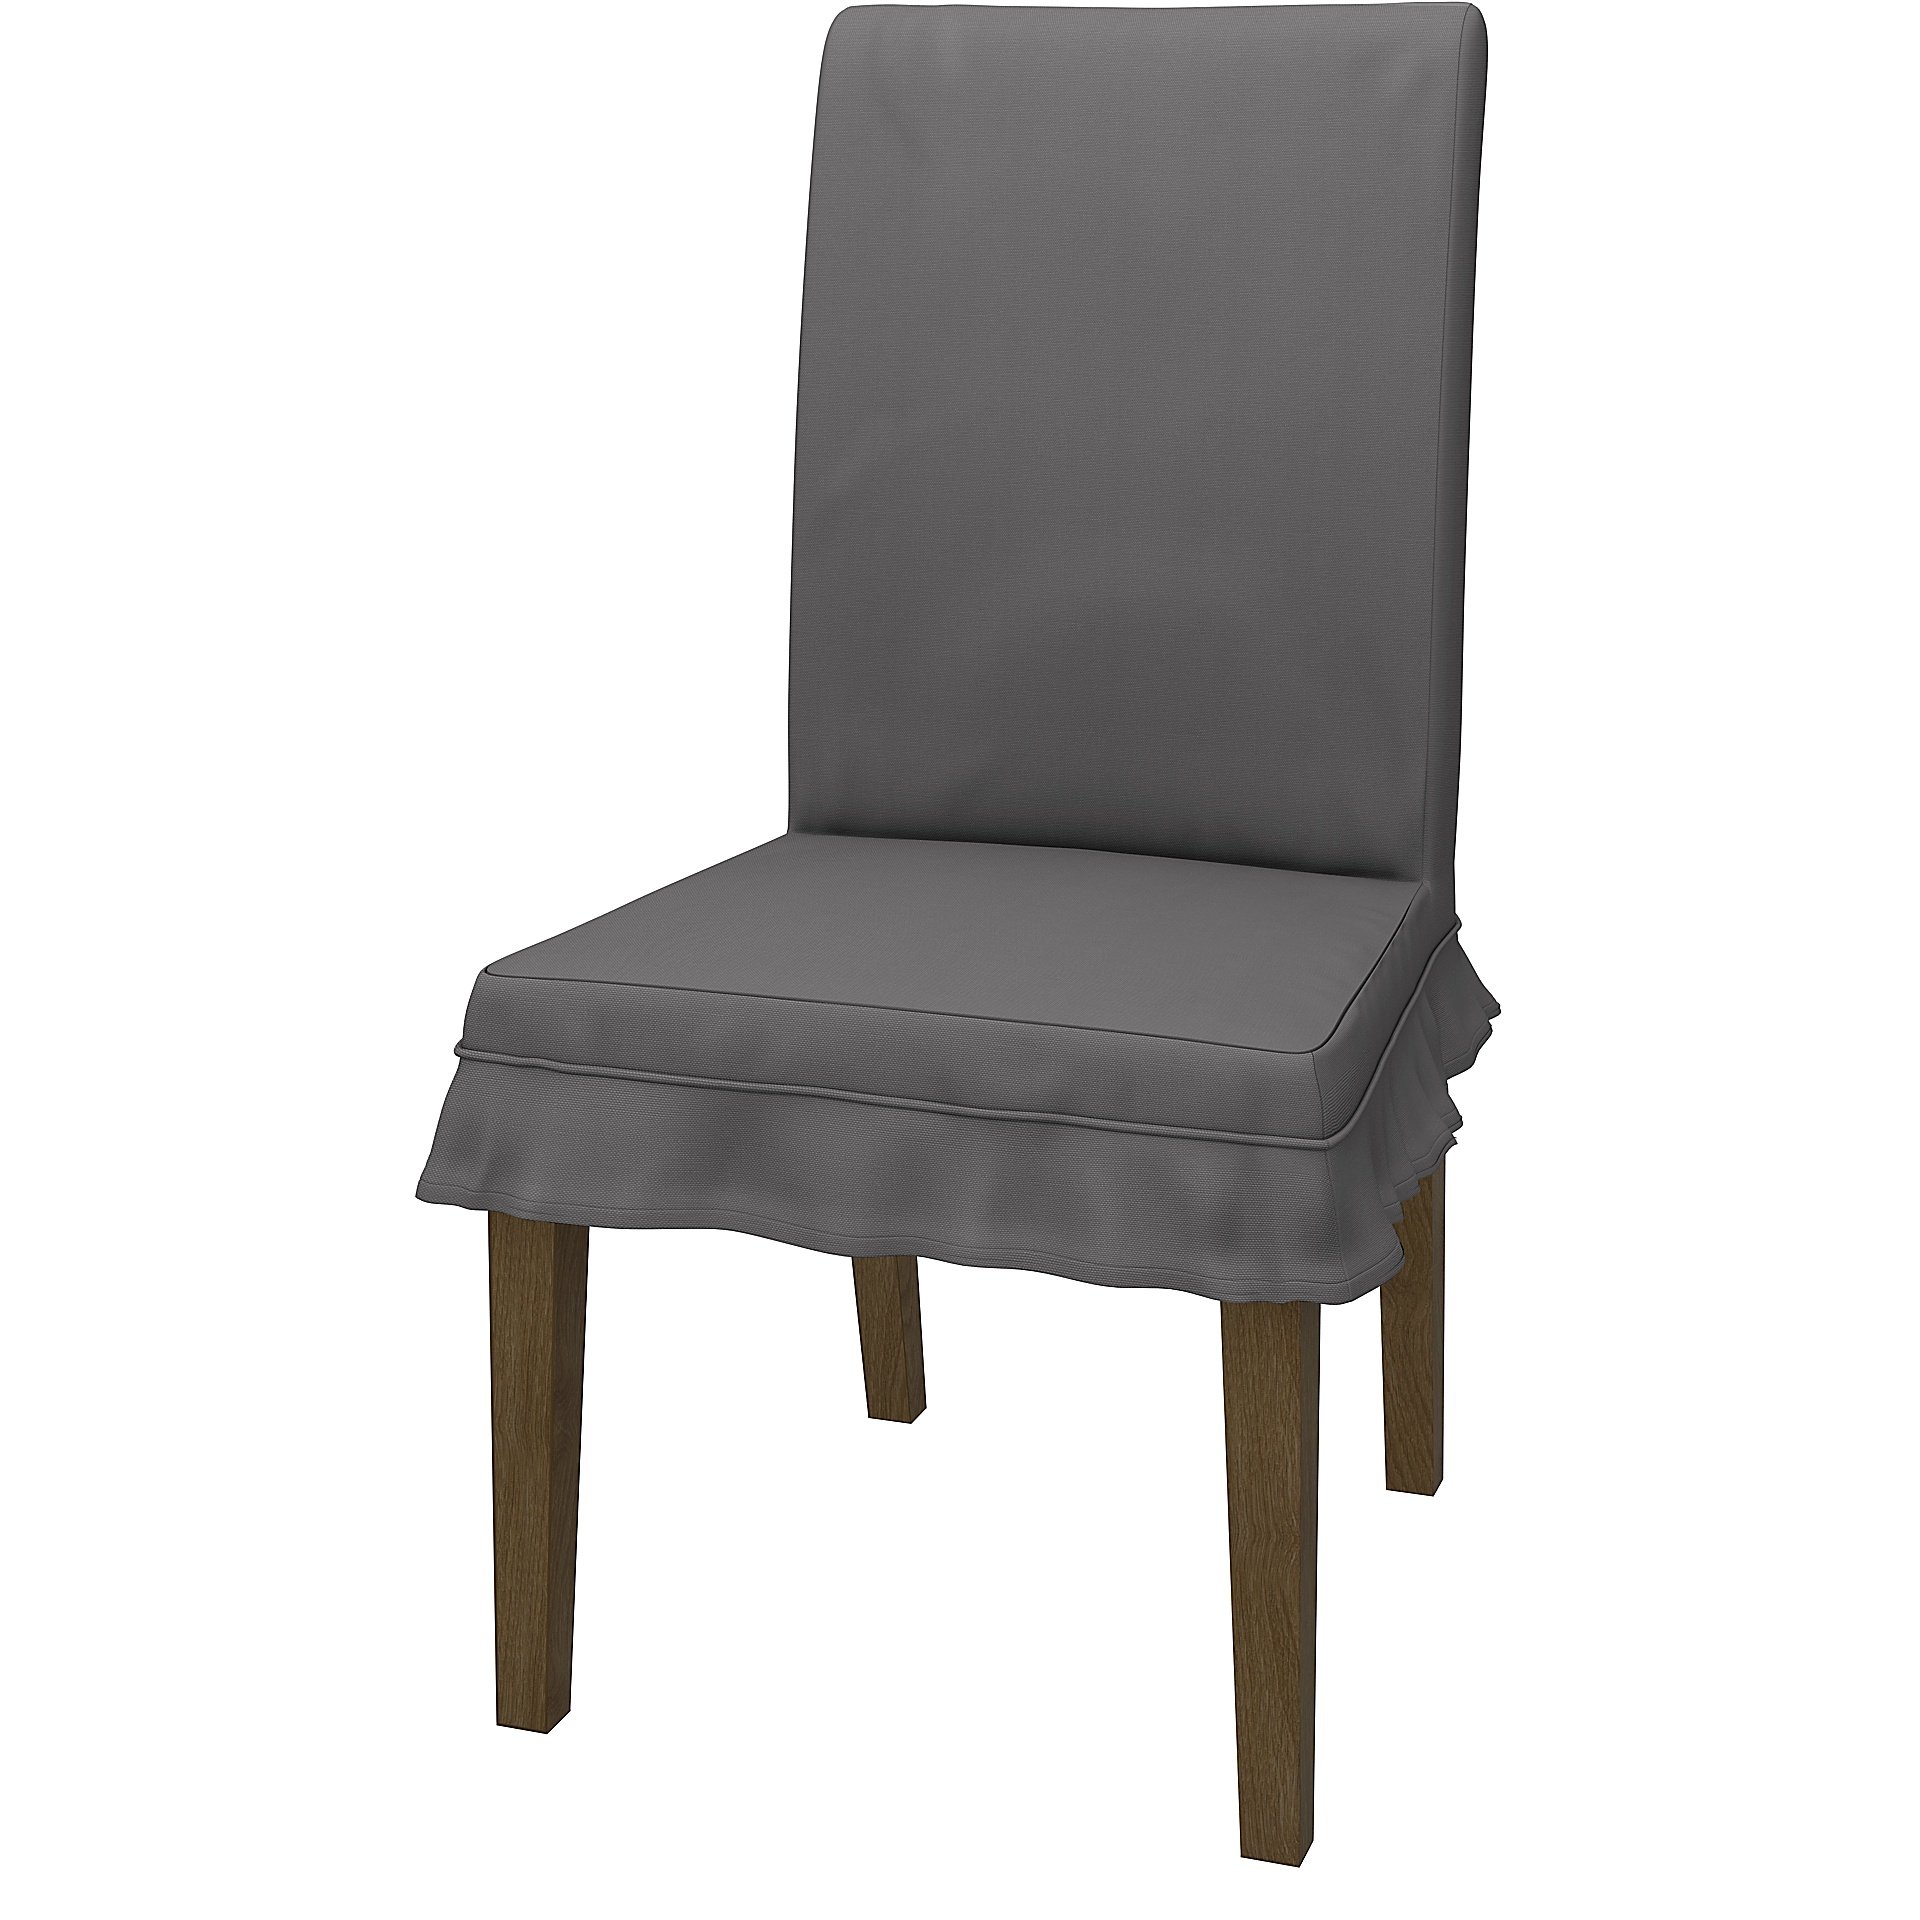 IKEA - HENRIKSDAL DINING CHAIR COVER SHORT SKIRT WITH RUFFLES (STANDARD MODEL), Smoked Pearl, Cotton